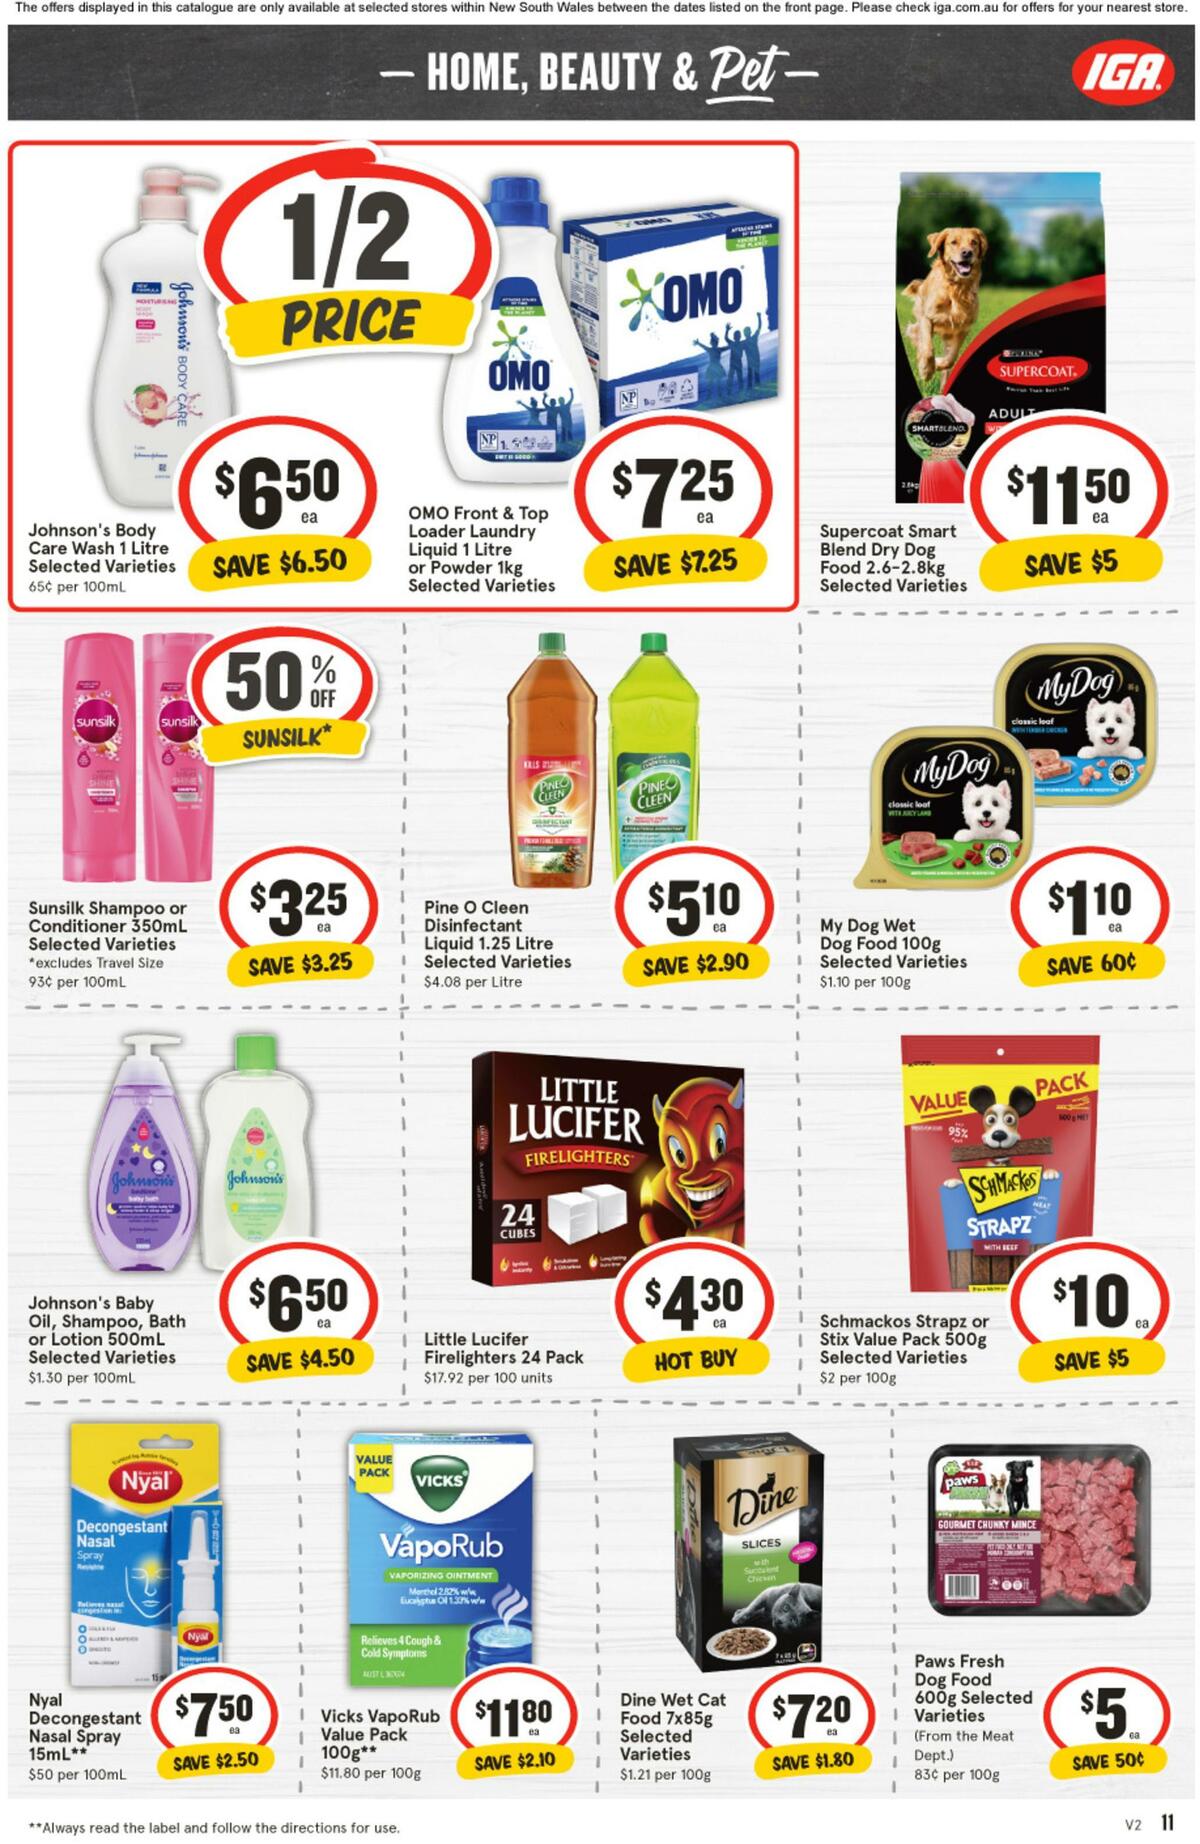 IGA Catalogues from 26 April